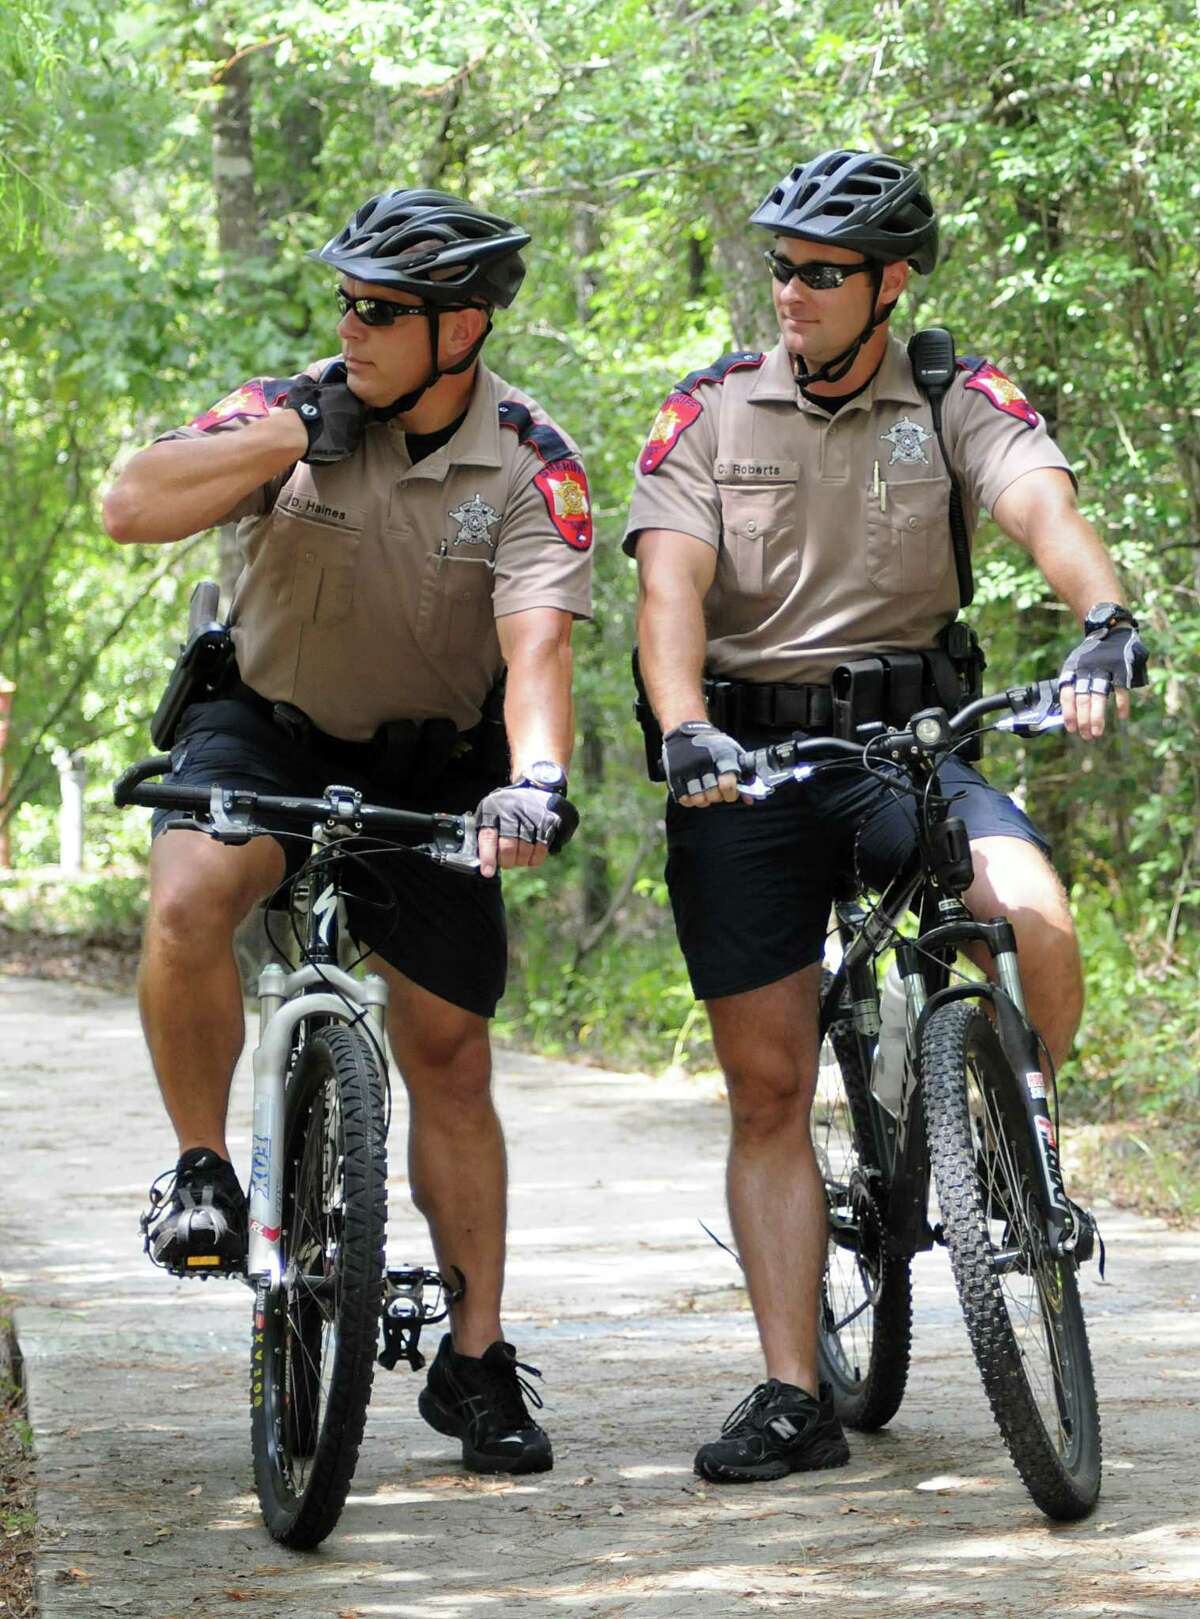 Montgomery County Sheriff's Department Bike Patrol deputies David Haines and Chris Roberts call in a suspicious vehicle license as they ride a patrol on one of the bike paths in The Woodlands. The bike patrols have started more patrols into residential neighborhoods following recent assaults on the bike paths. Photo by David Hopper.